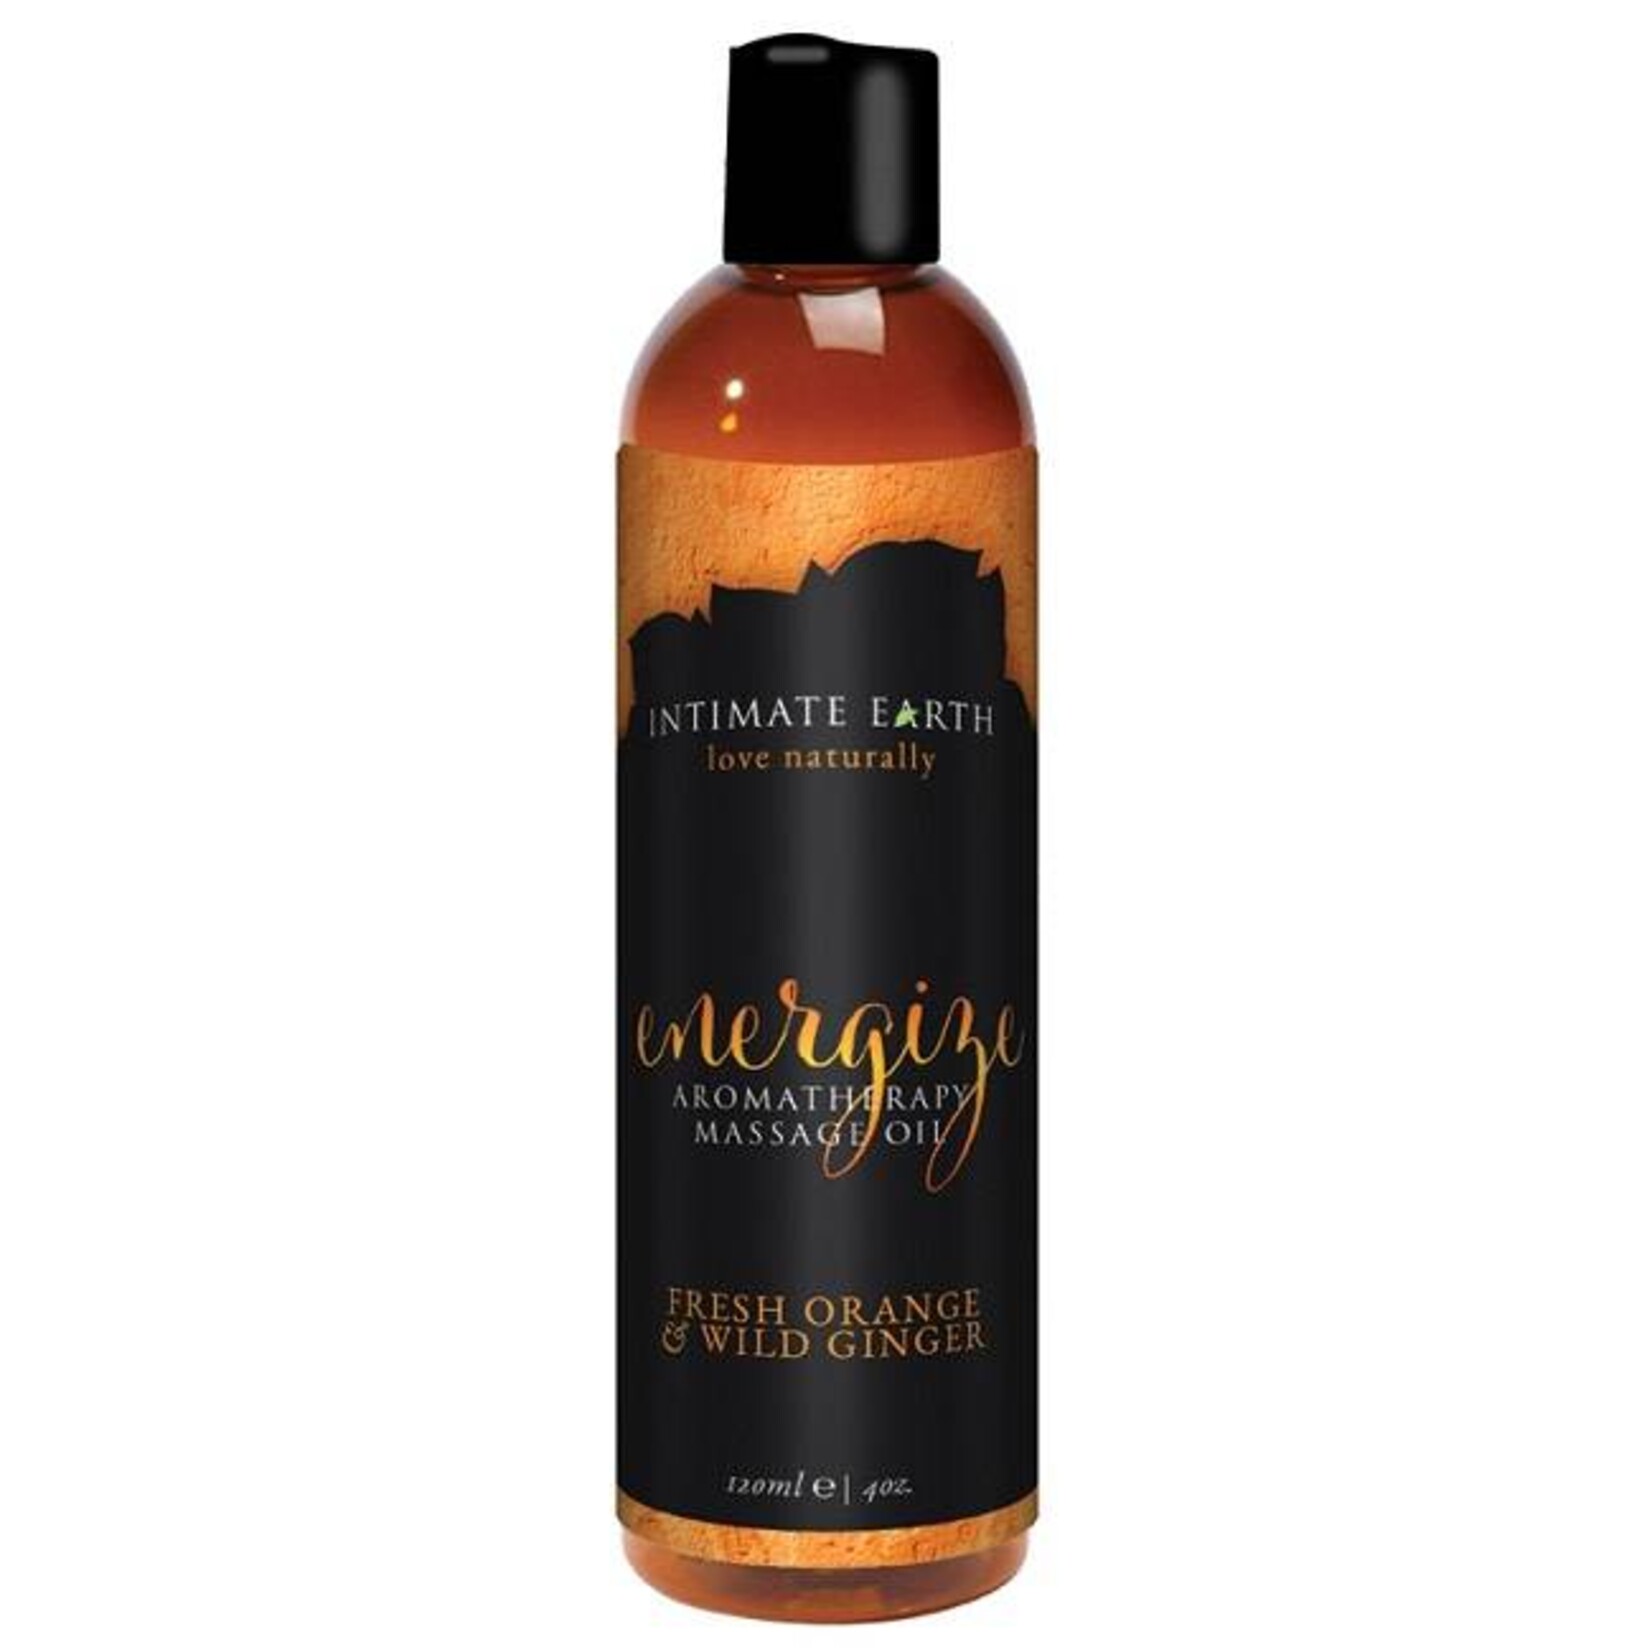 Intimate Earth Intimate Earth Aromatherapy Massage Oil 4oz